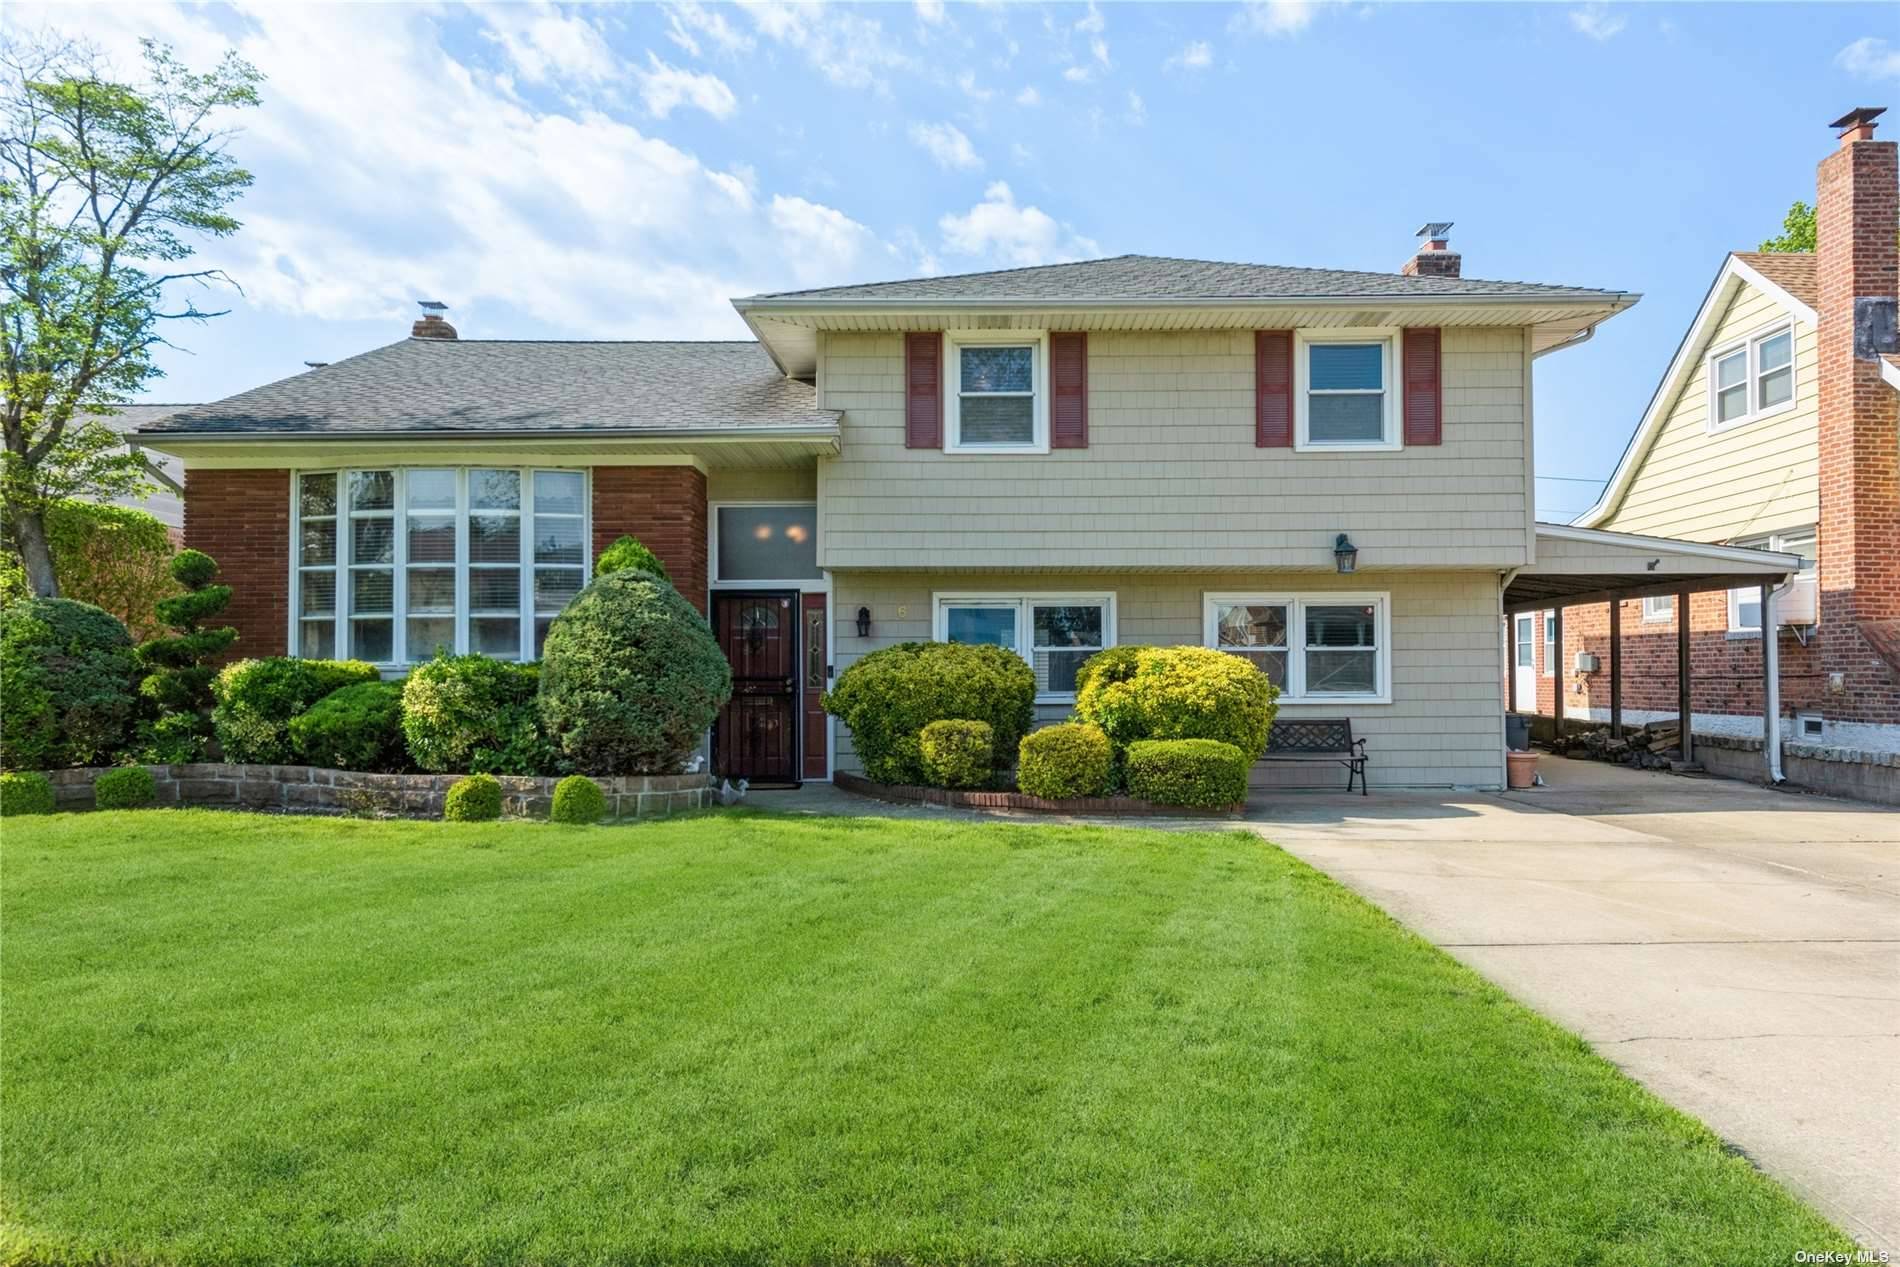 Stop the search amp ; welcome home to this breathtaking three bedroom split level home.